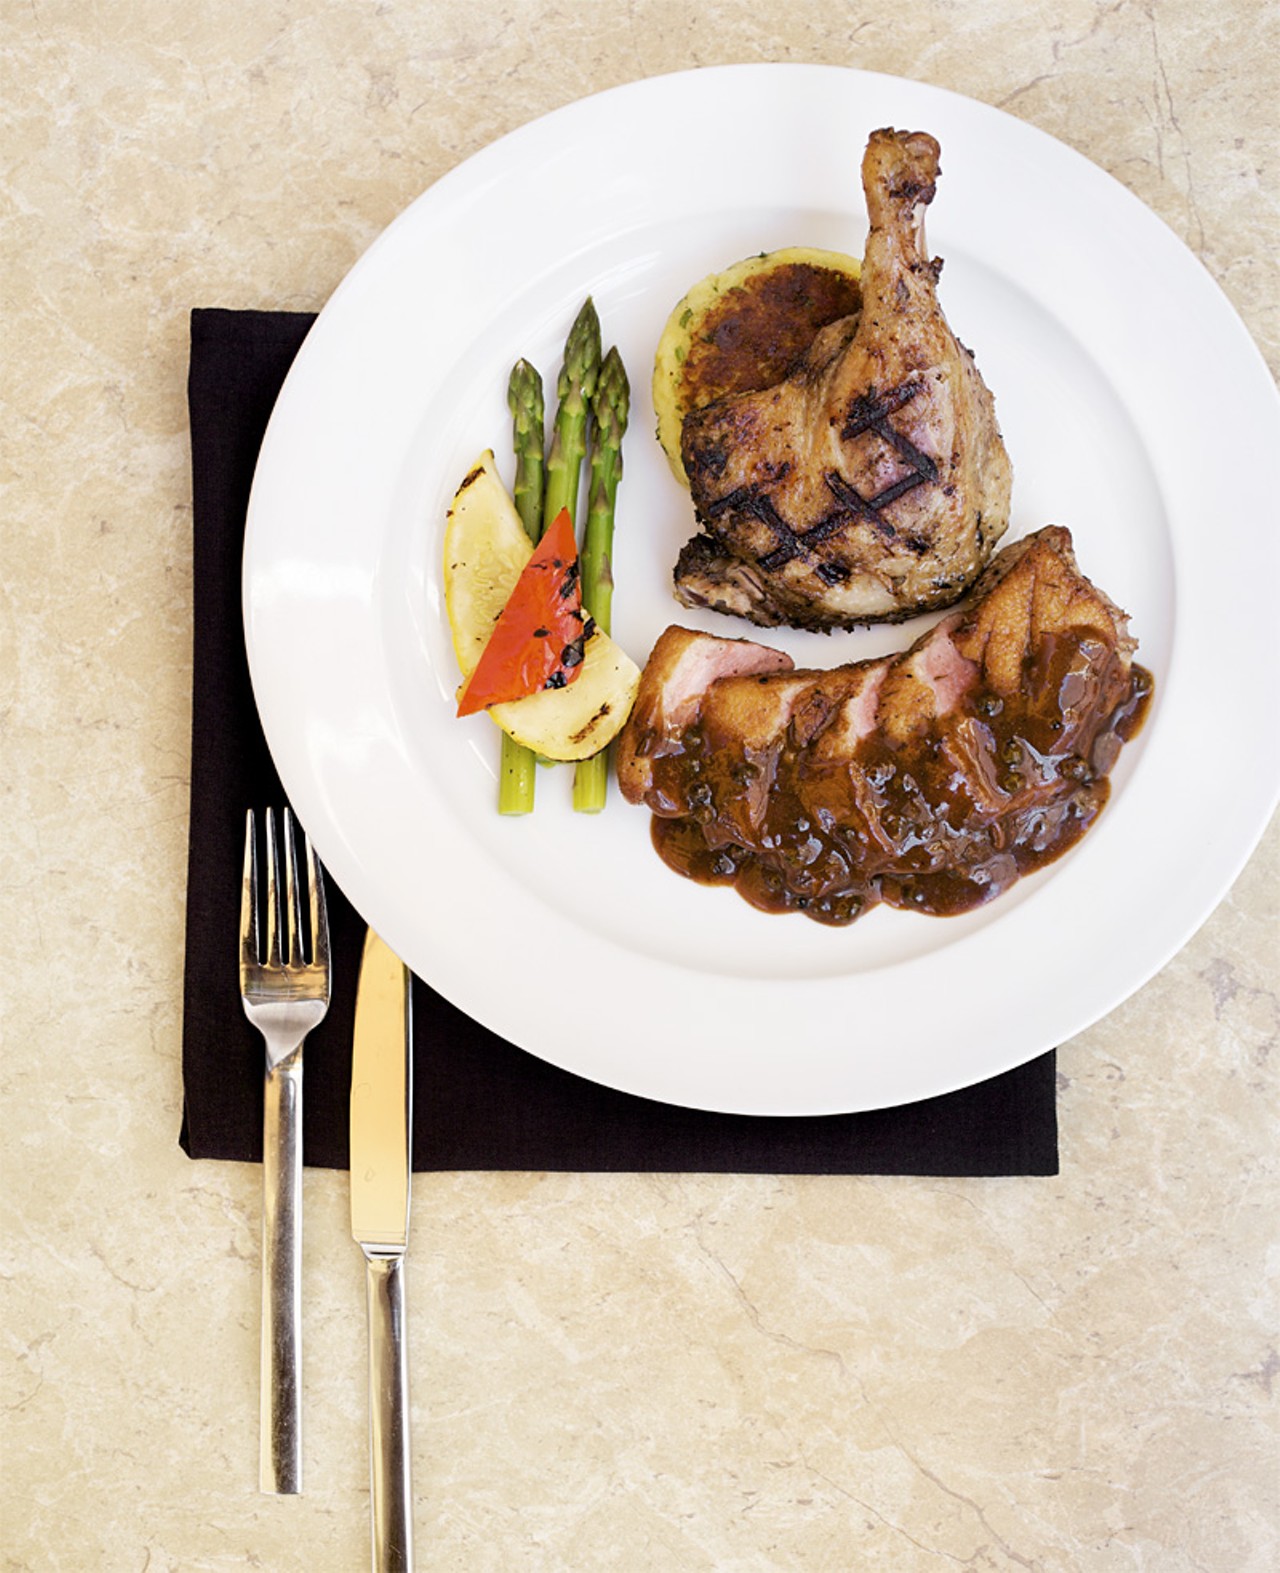 The Grilled Duck Breast with Confit Leg is served with candied date peppercorn pan gravy, Maytag bleu cheese potato cake and fresh vegetables.